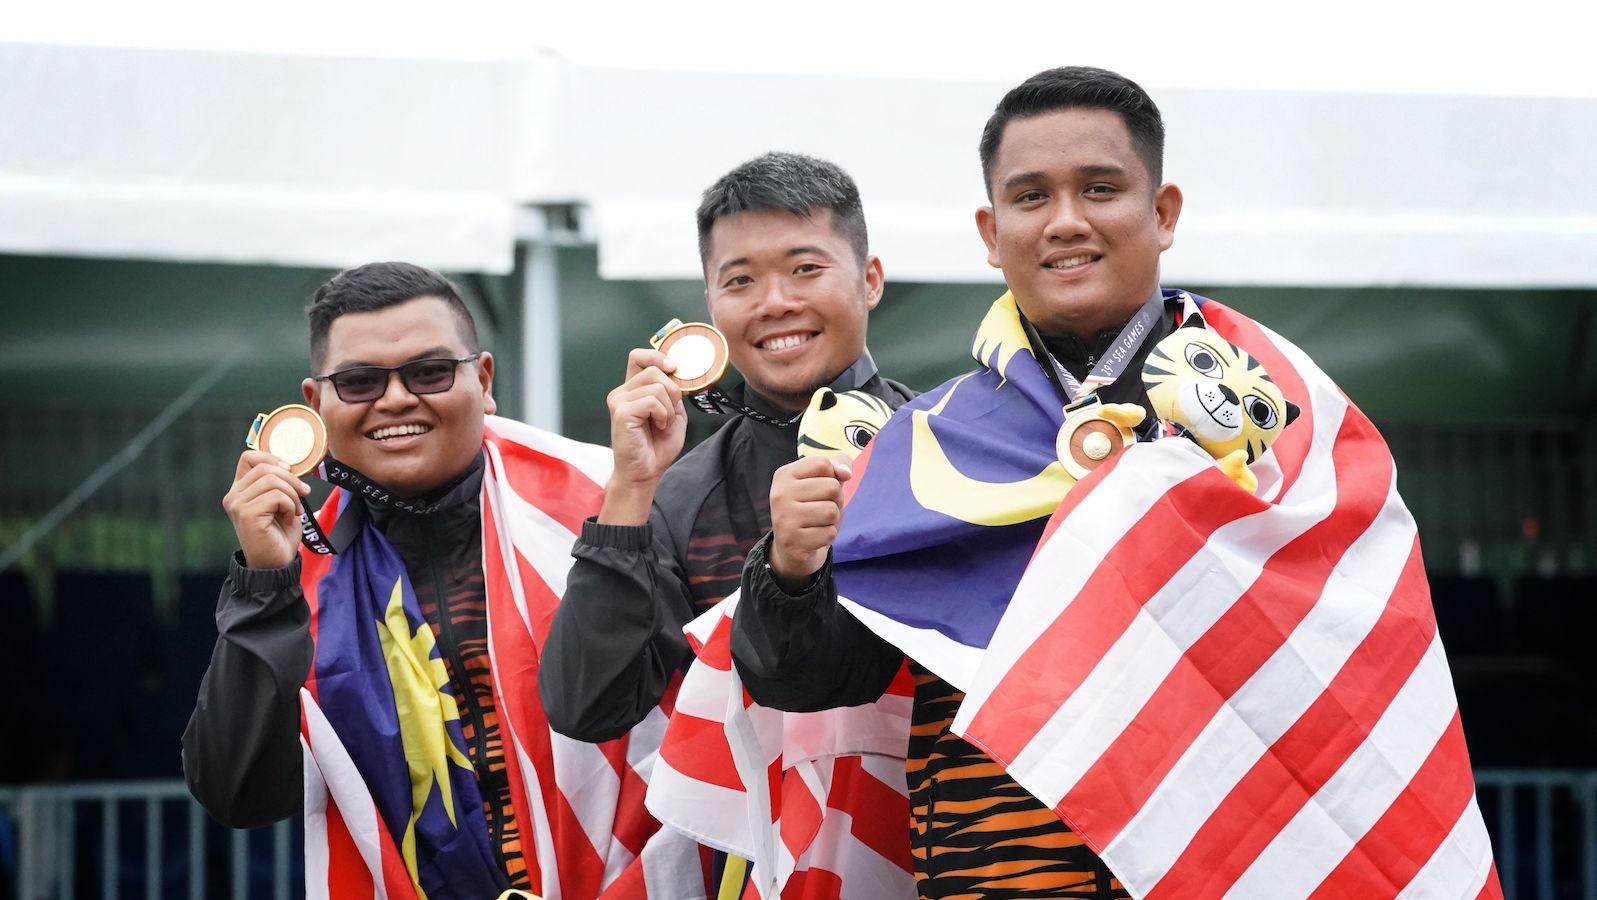 Here Are All The Gold Medals Malaysia Has Won So Far at the SEA Games - World Of Buzz